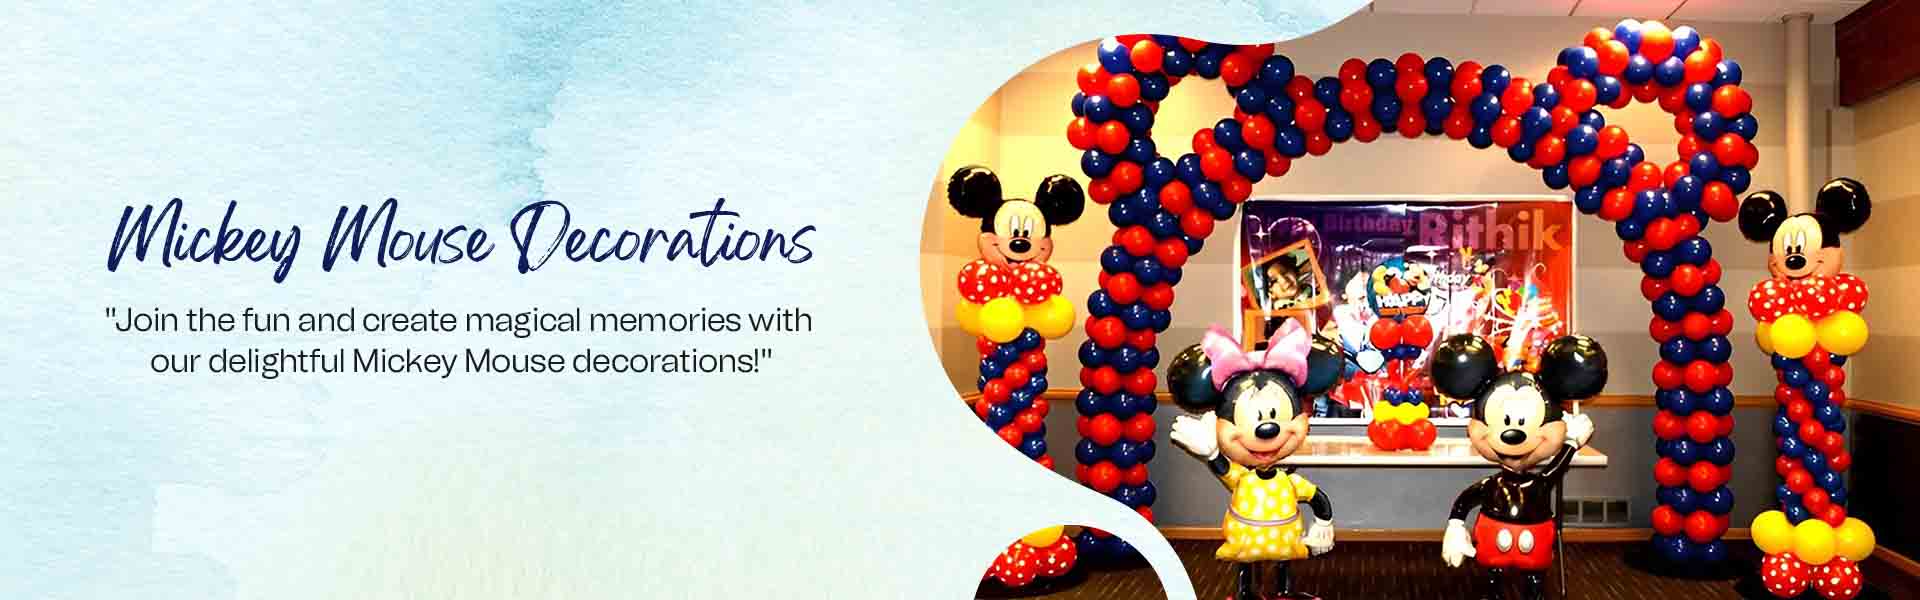 Mickey Mouse Decorations